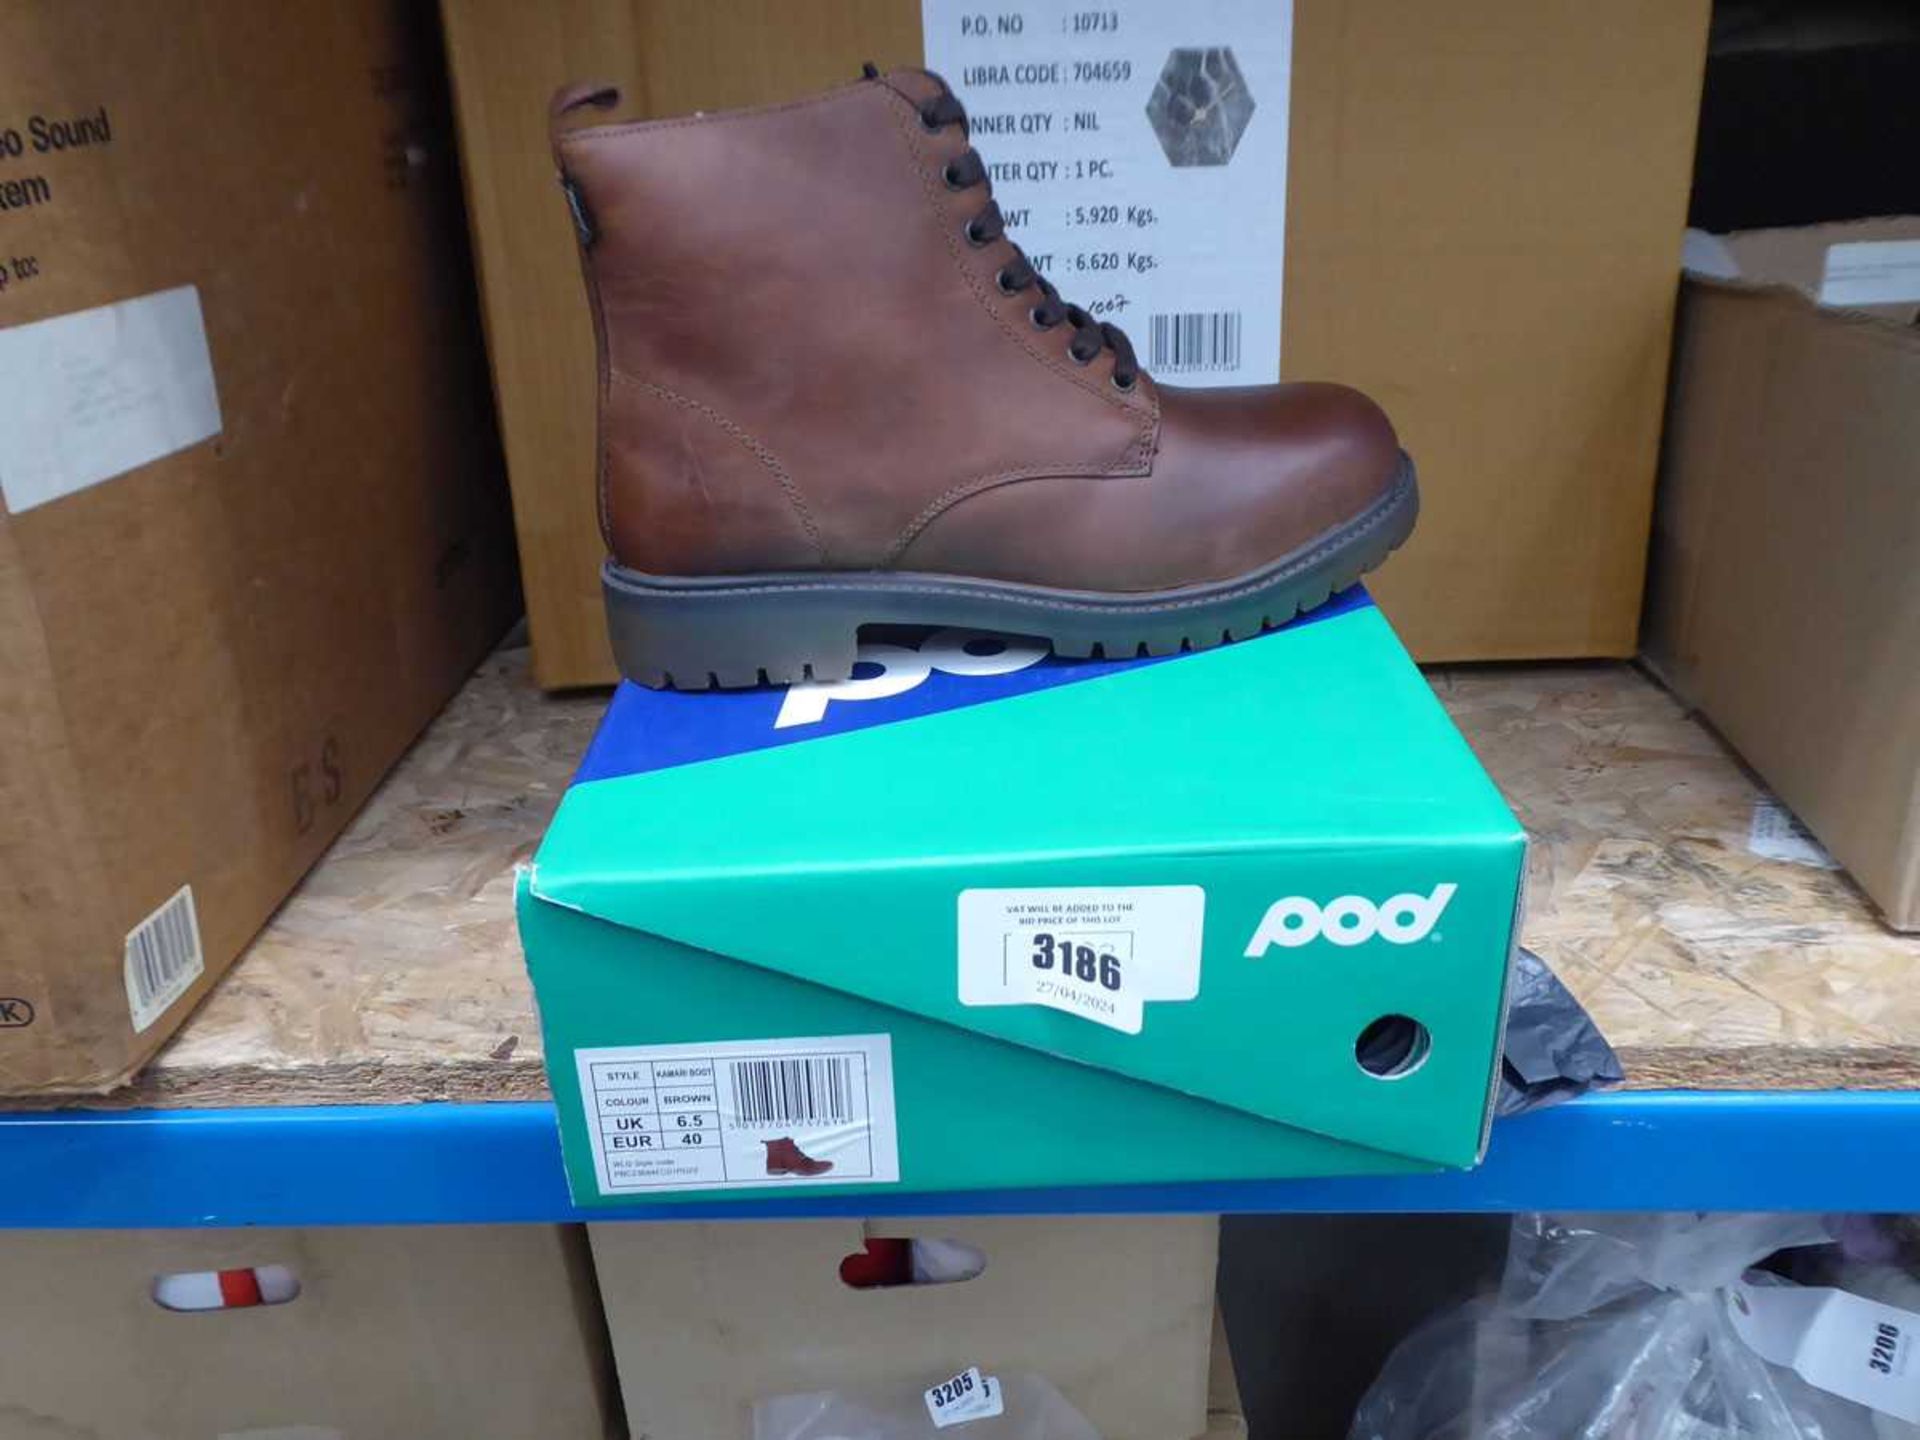 One boxed pair of brown boots size 6.5